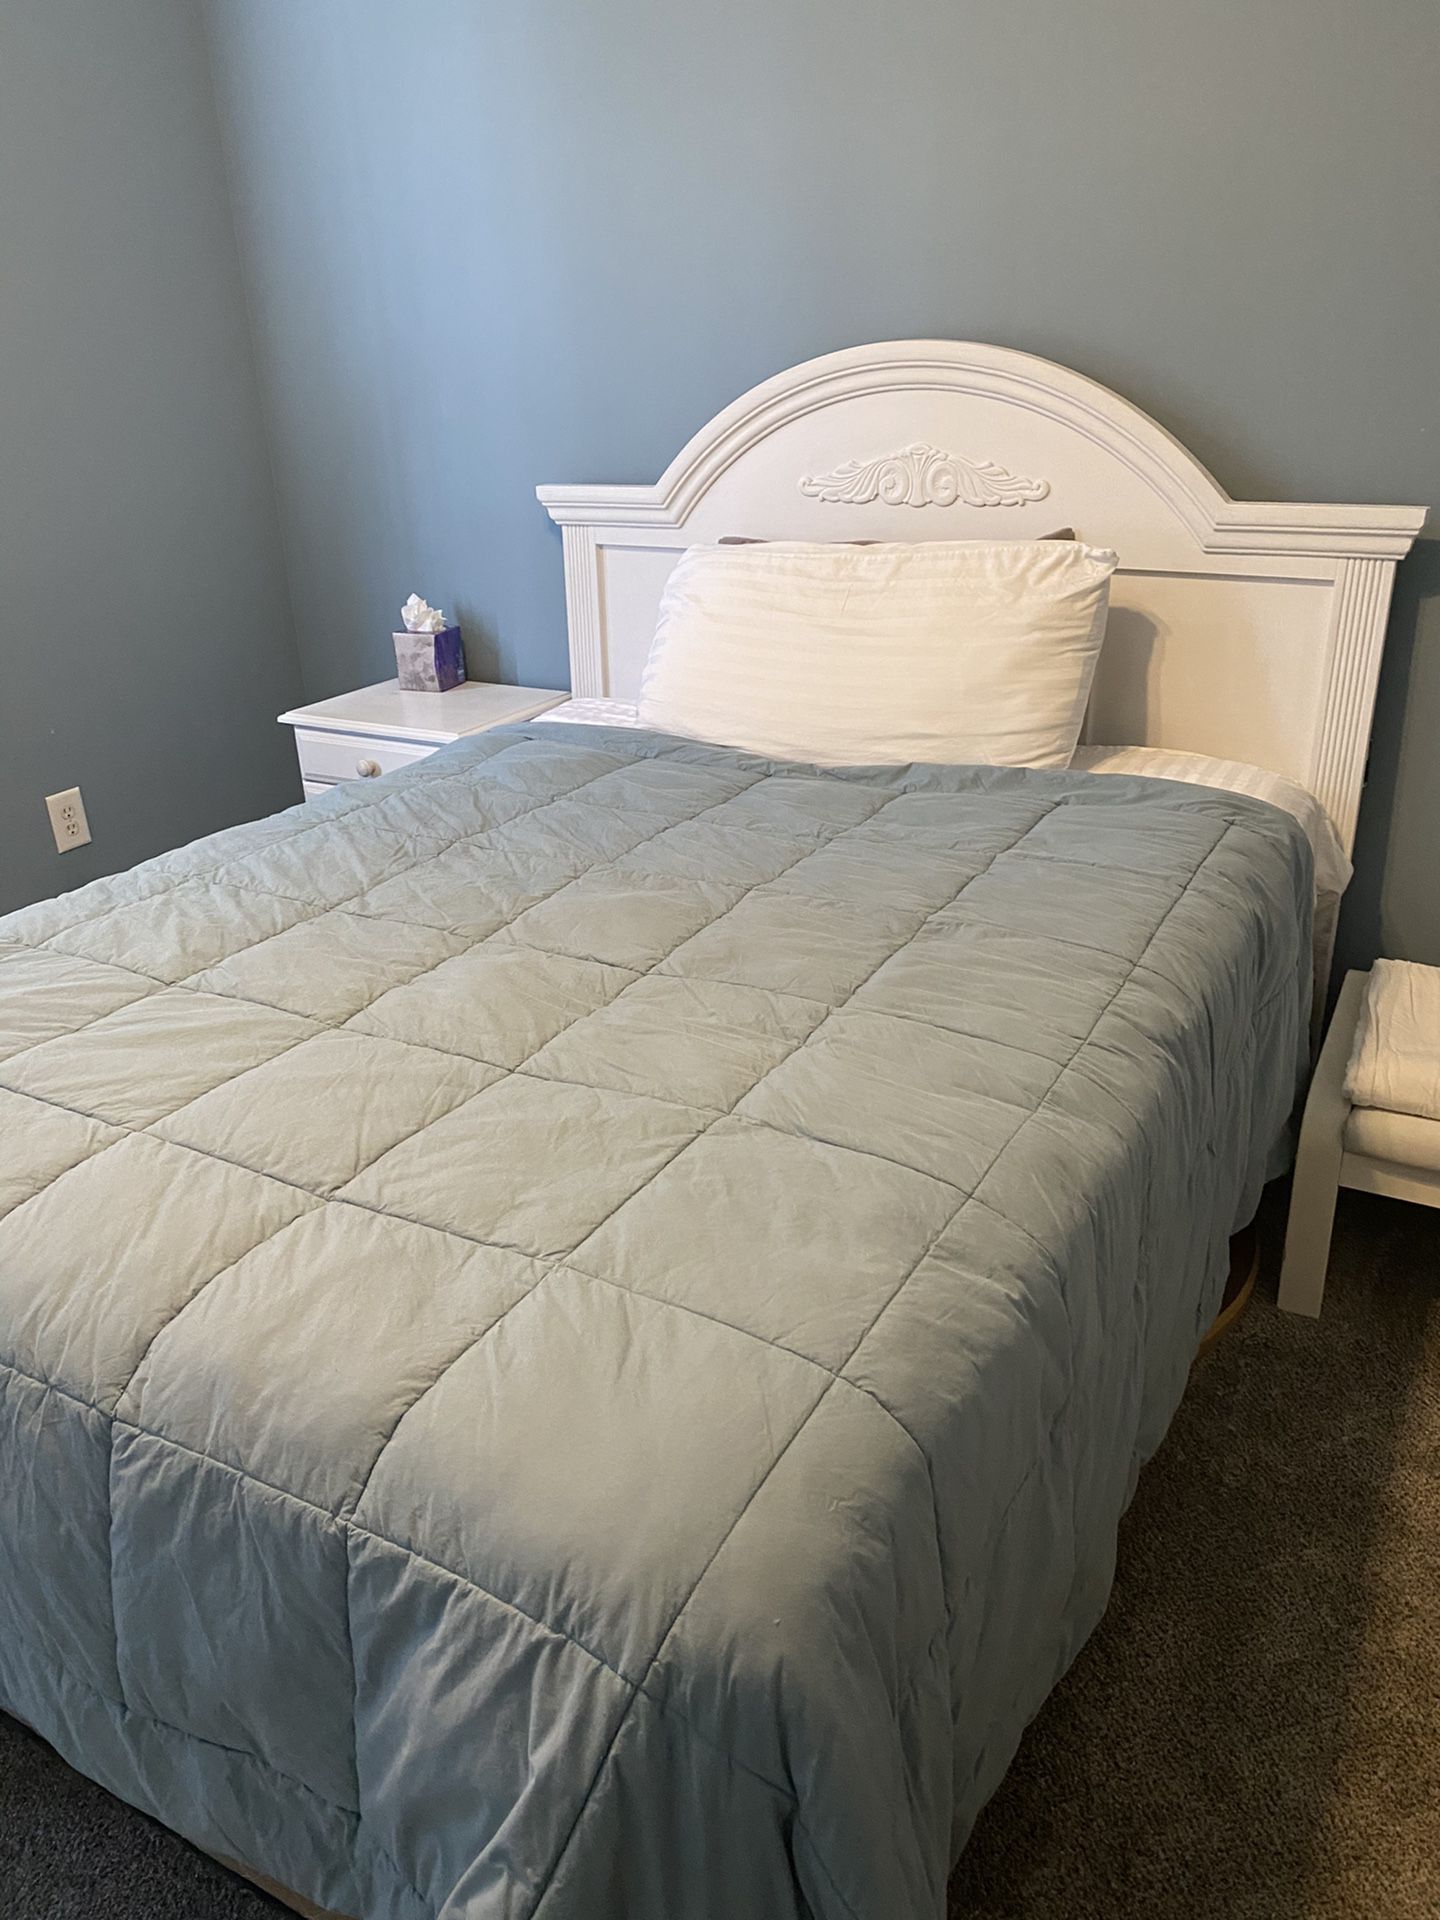 Entire bedroom set including bed with queen size mattress, two dressers, and nightstand